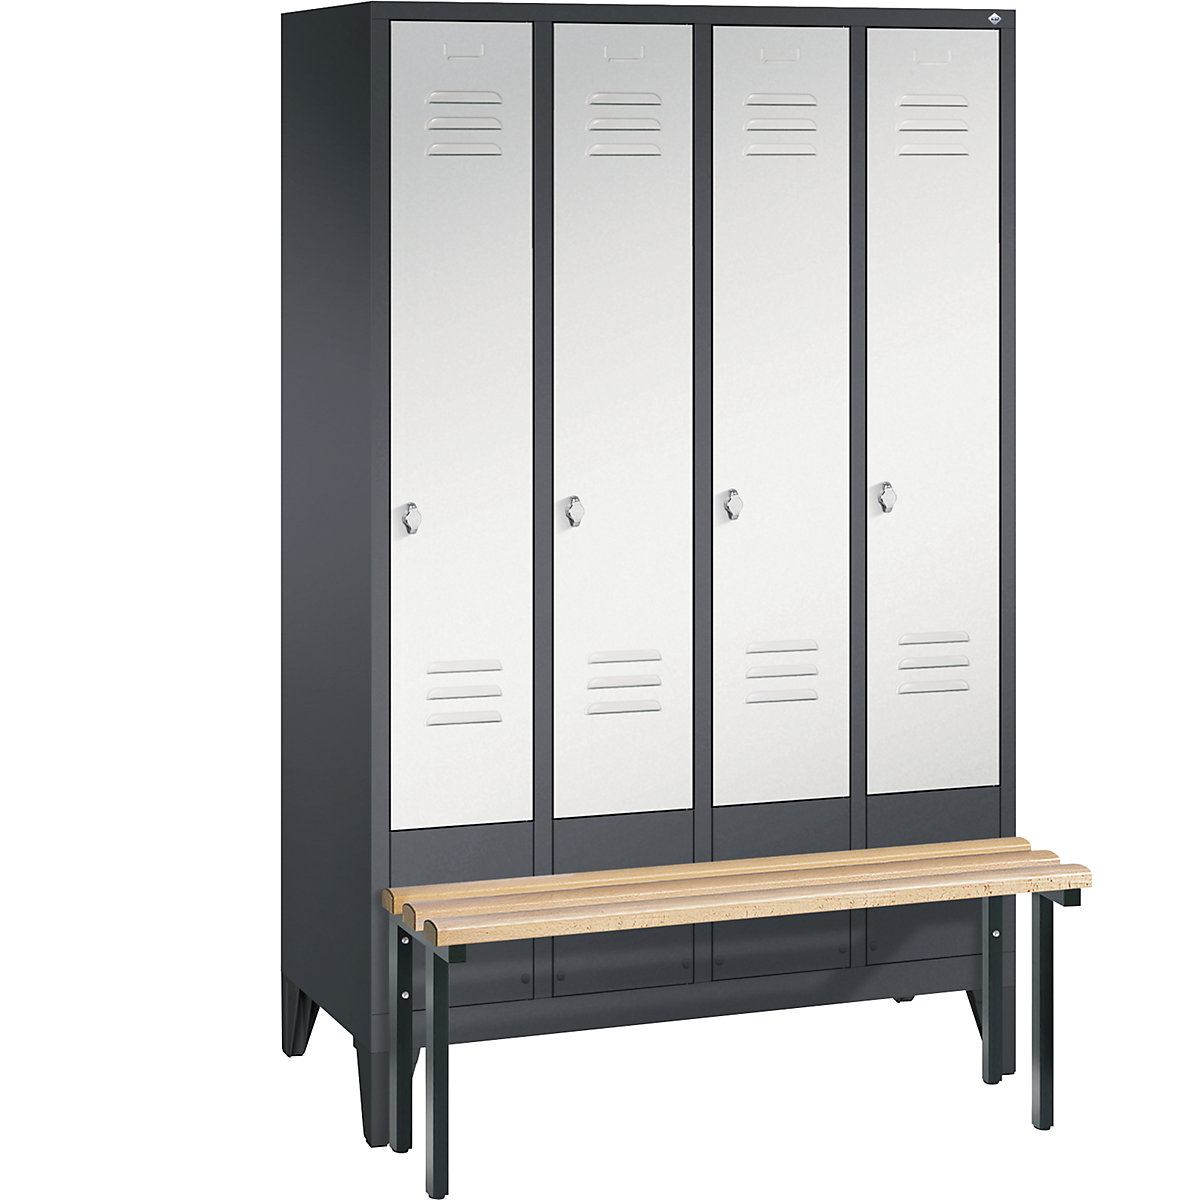 CLASSIC cloakroom locker with bench mounted in front – C+P, 4 compartments, compartment width 300 mm, black grey / light grey-7